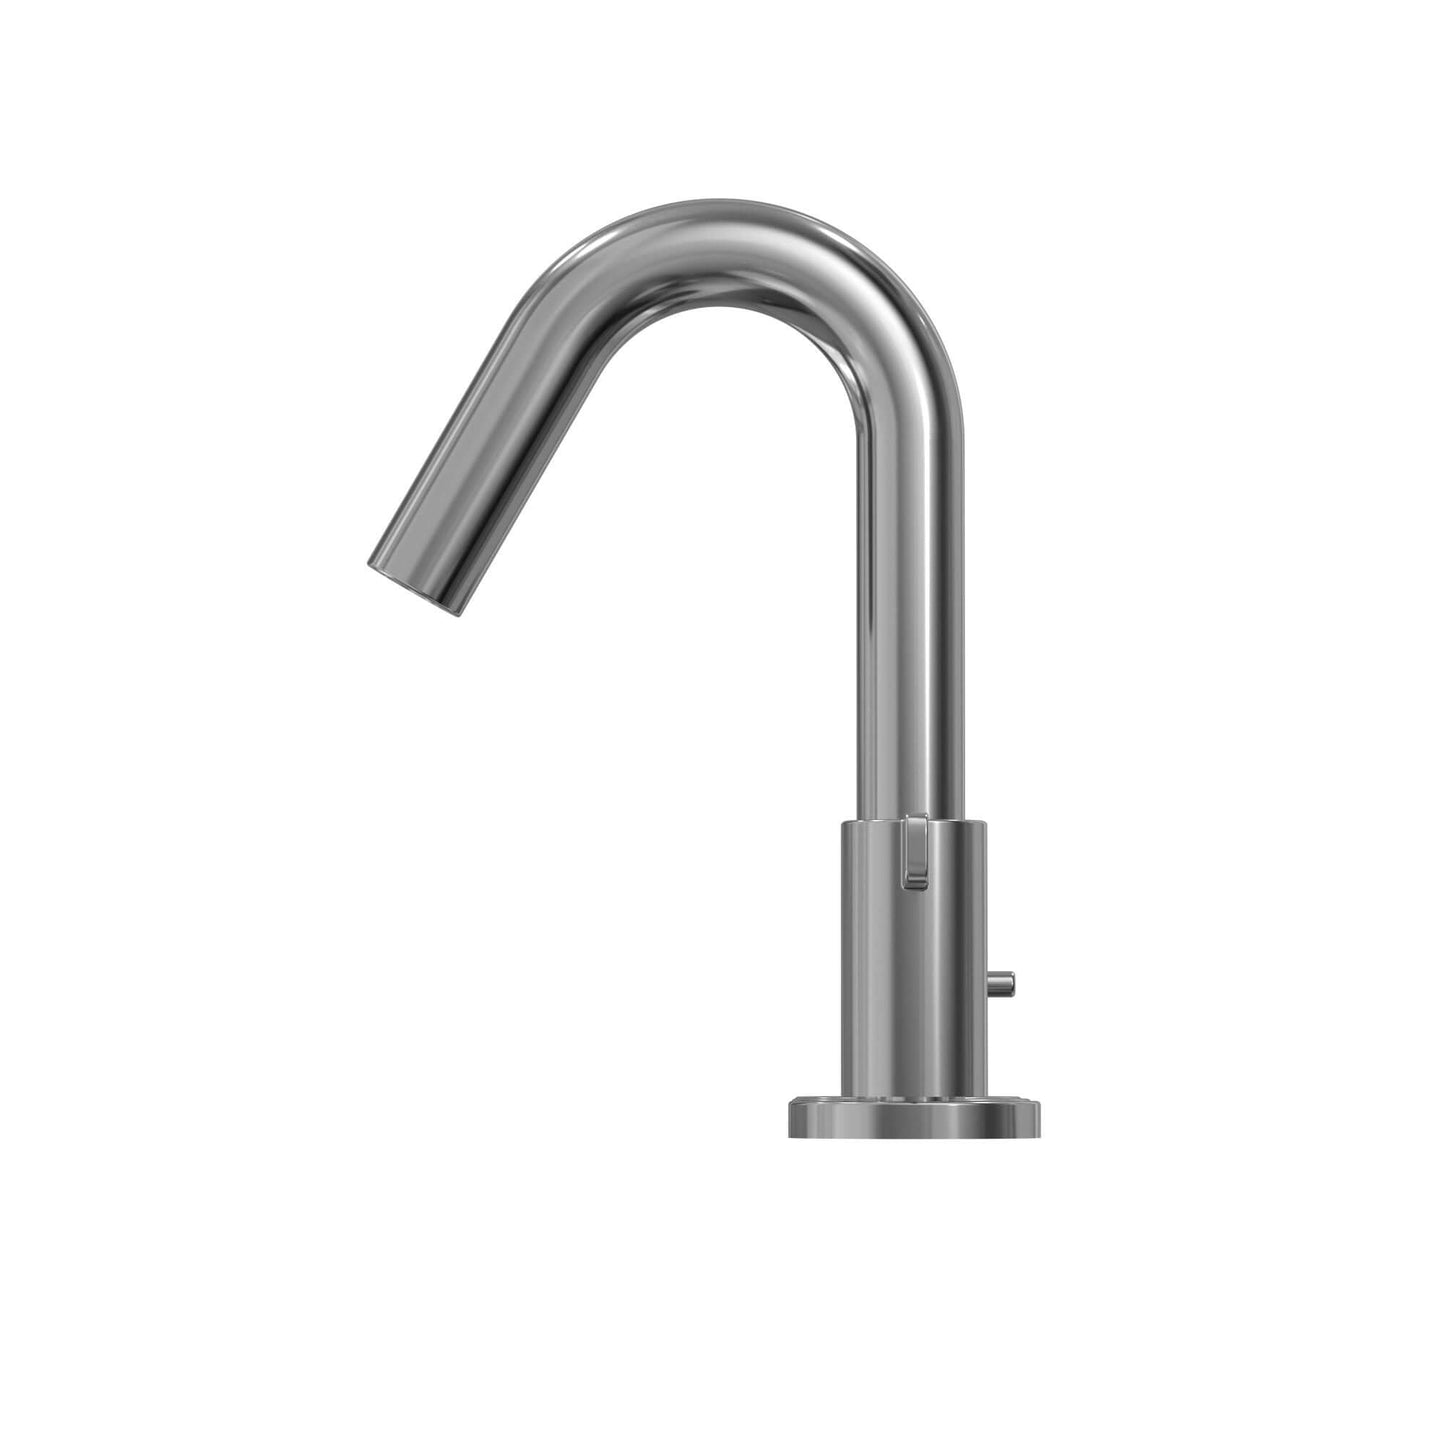 TOTO® GF Series 1.2 GPM Two Lever Handle Widespread Bathroom Sink Faucet  - TLG11201UA